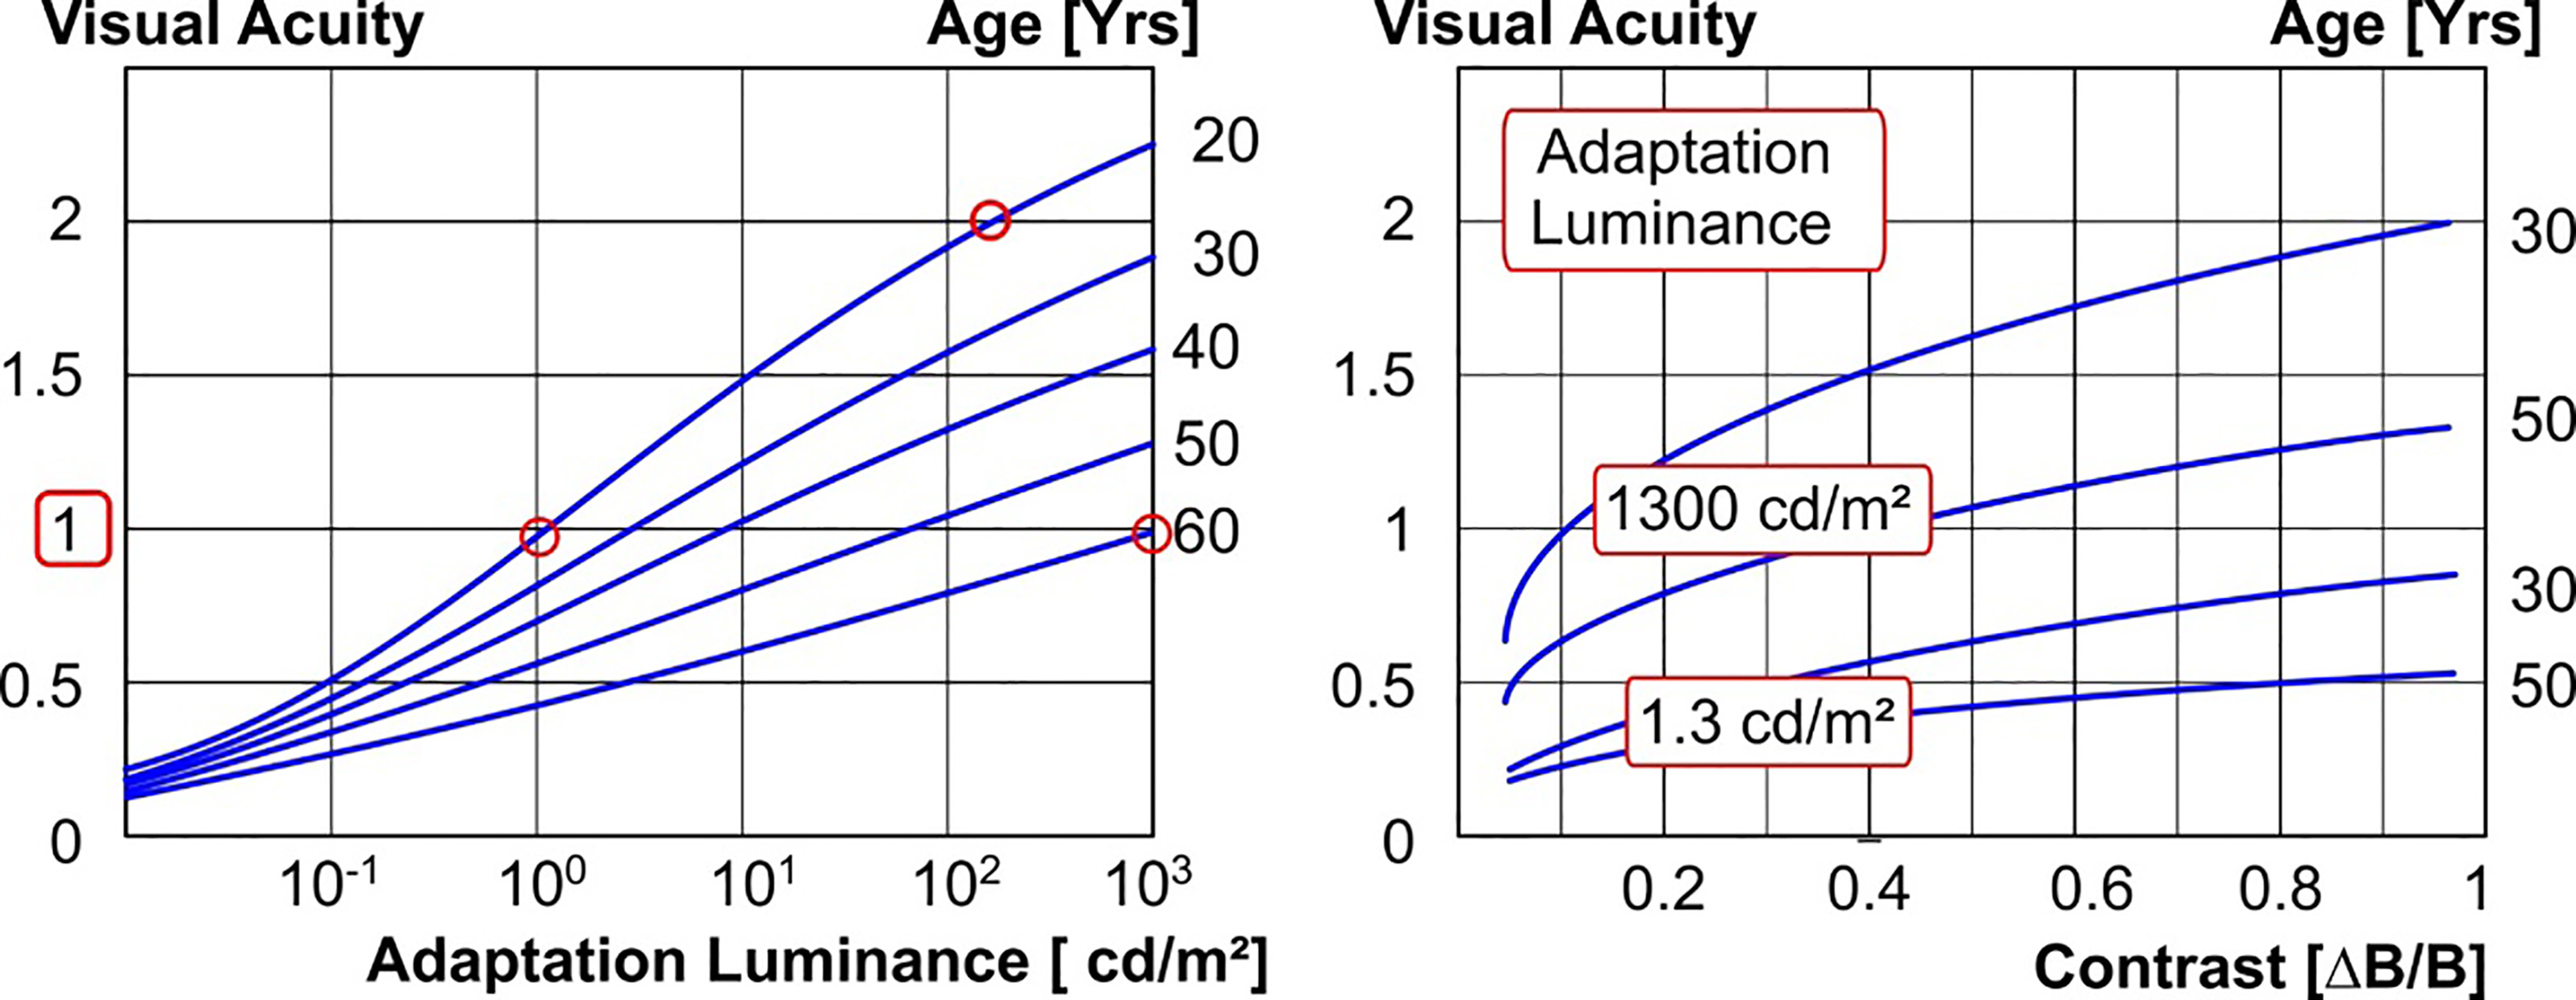 Impact of adaptation luminance (left) and contrast (right) on the visual acuity of different age groups. Sources [16, 17].